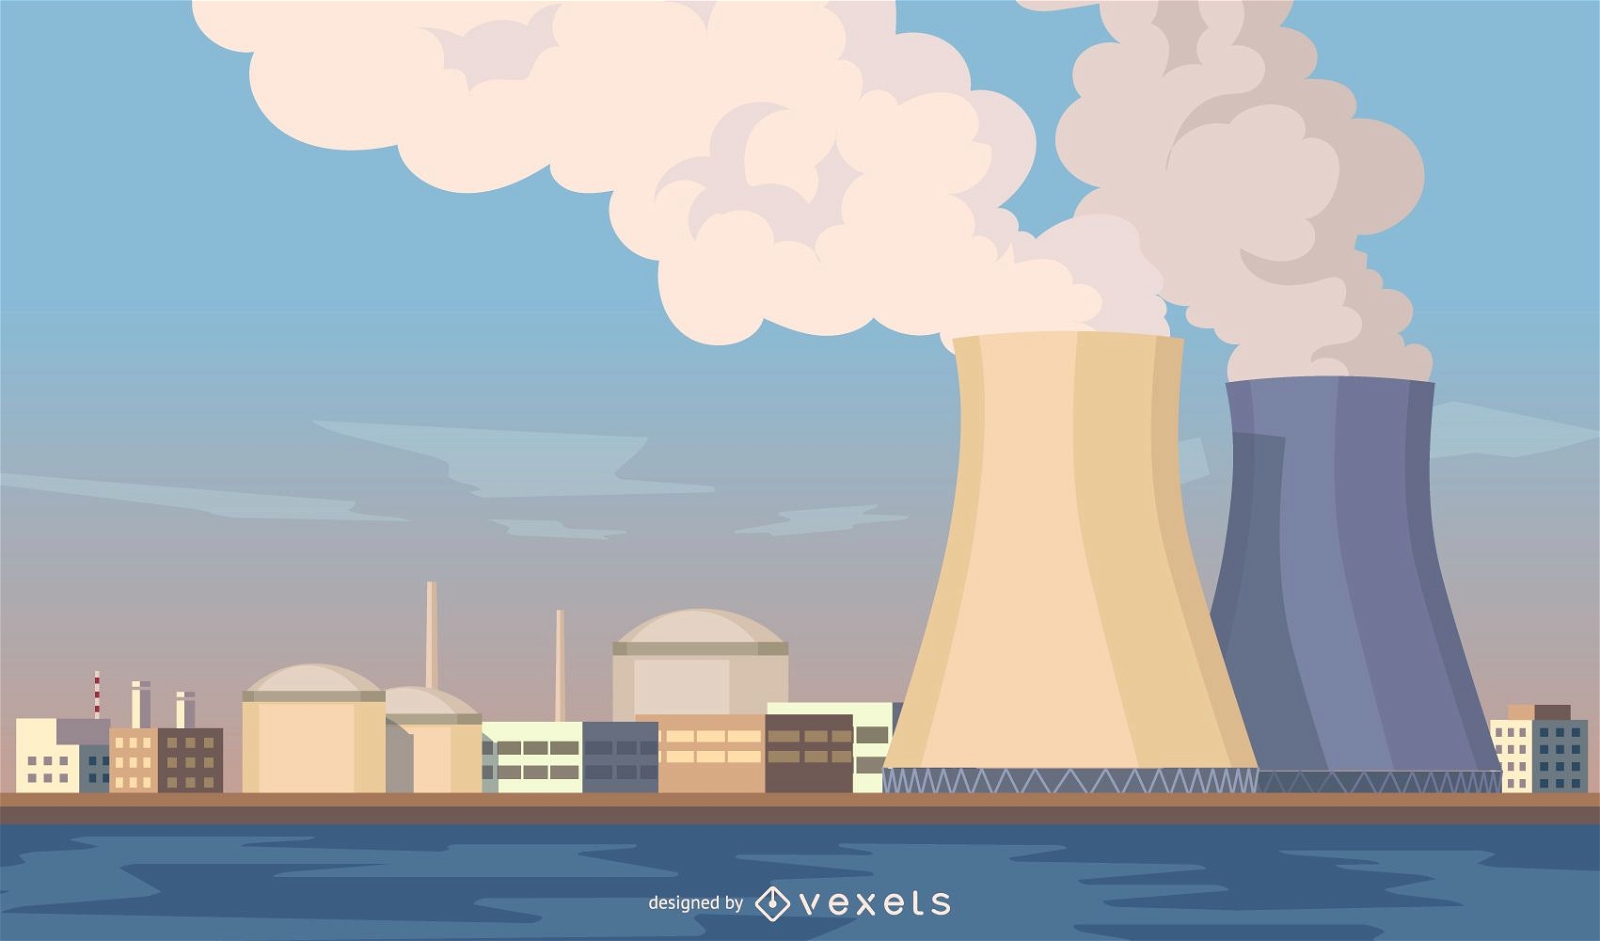 Cityscape with nuclear plants illustration